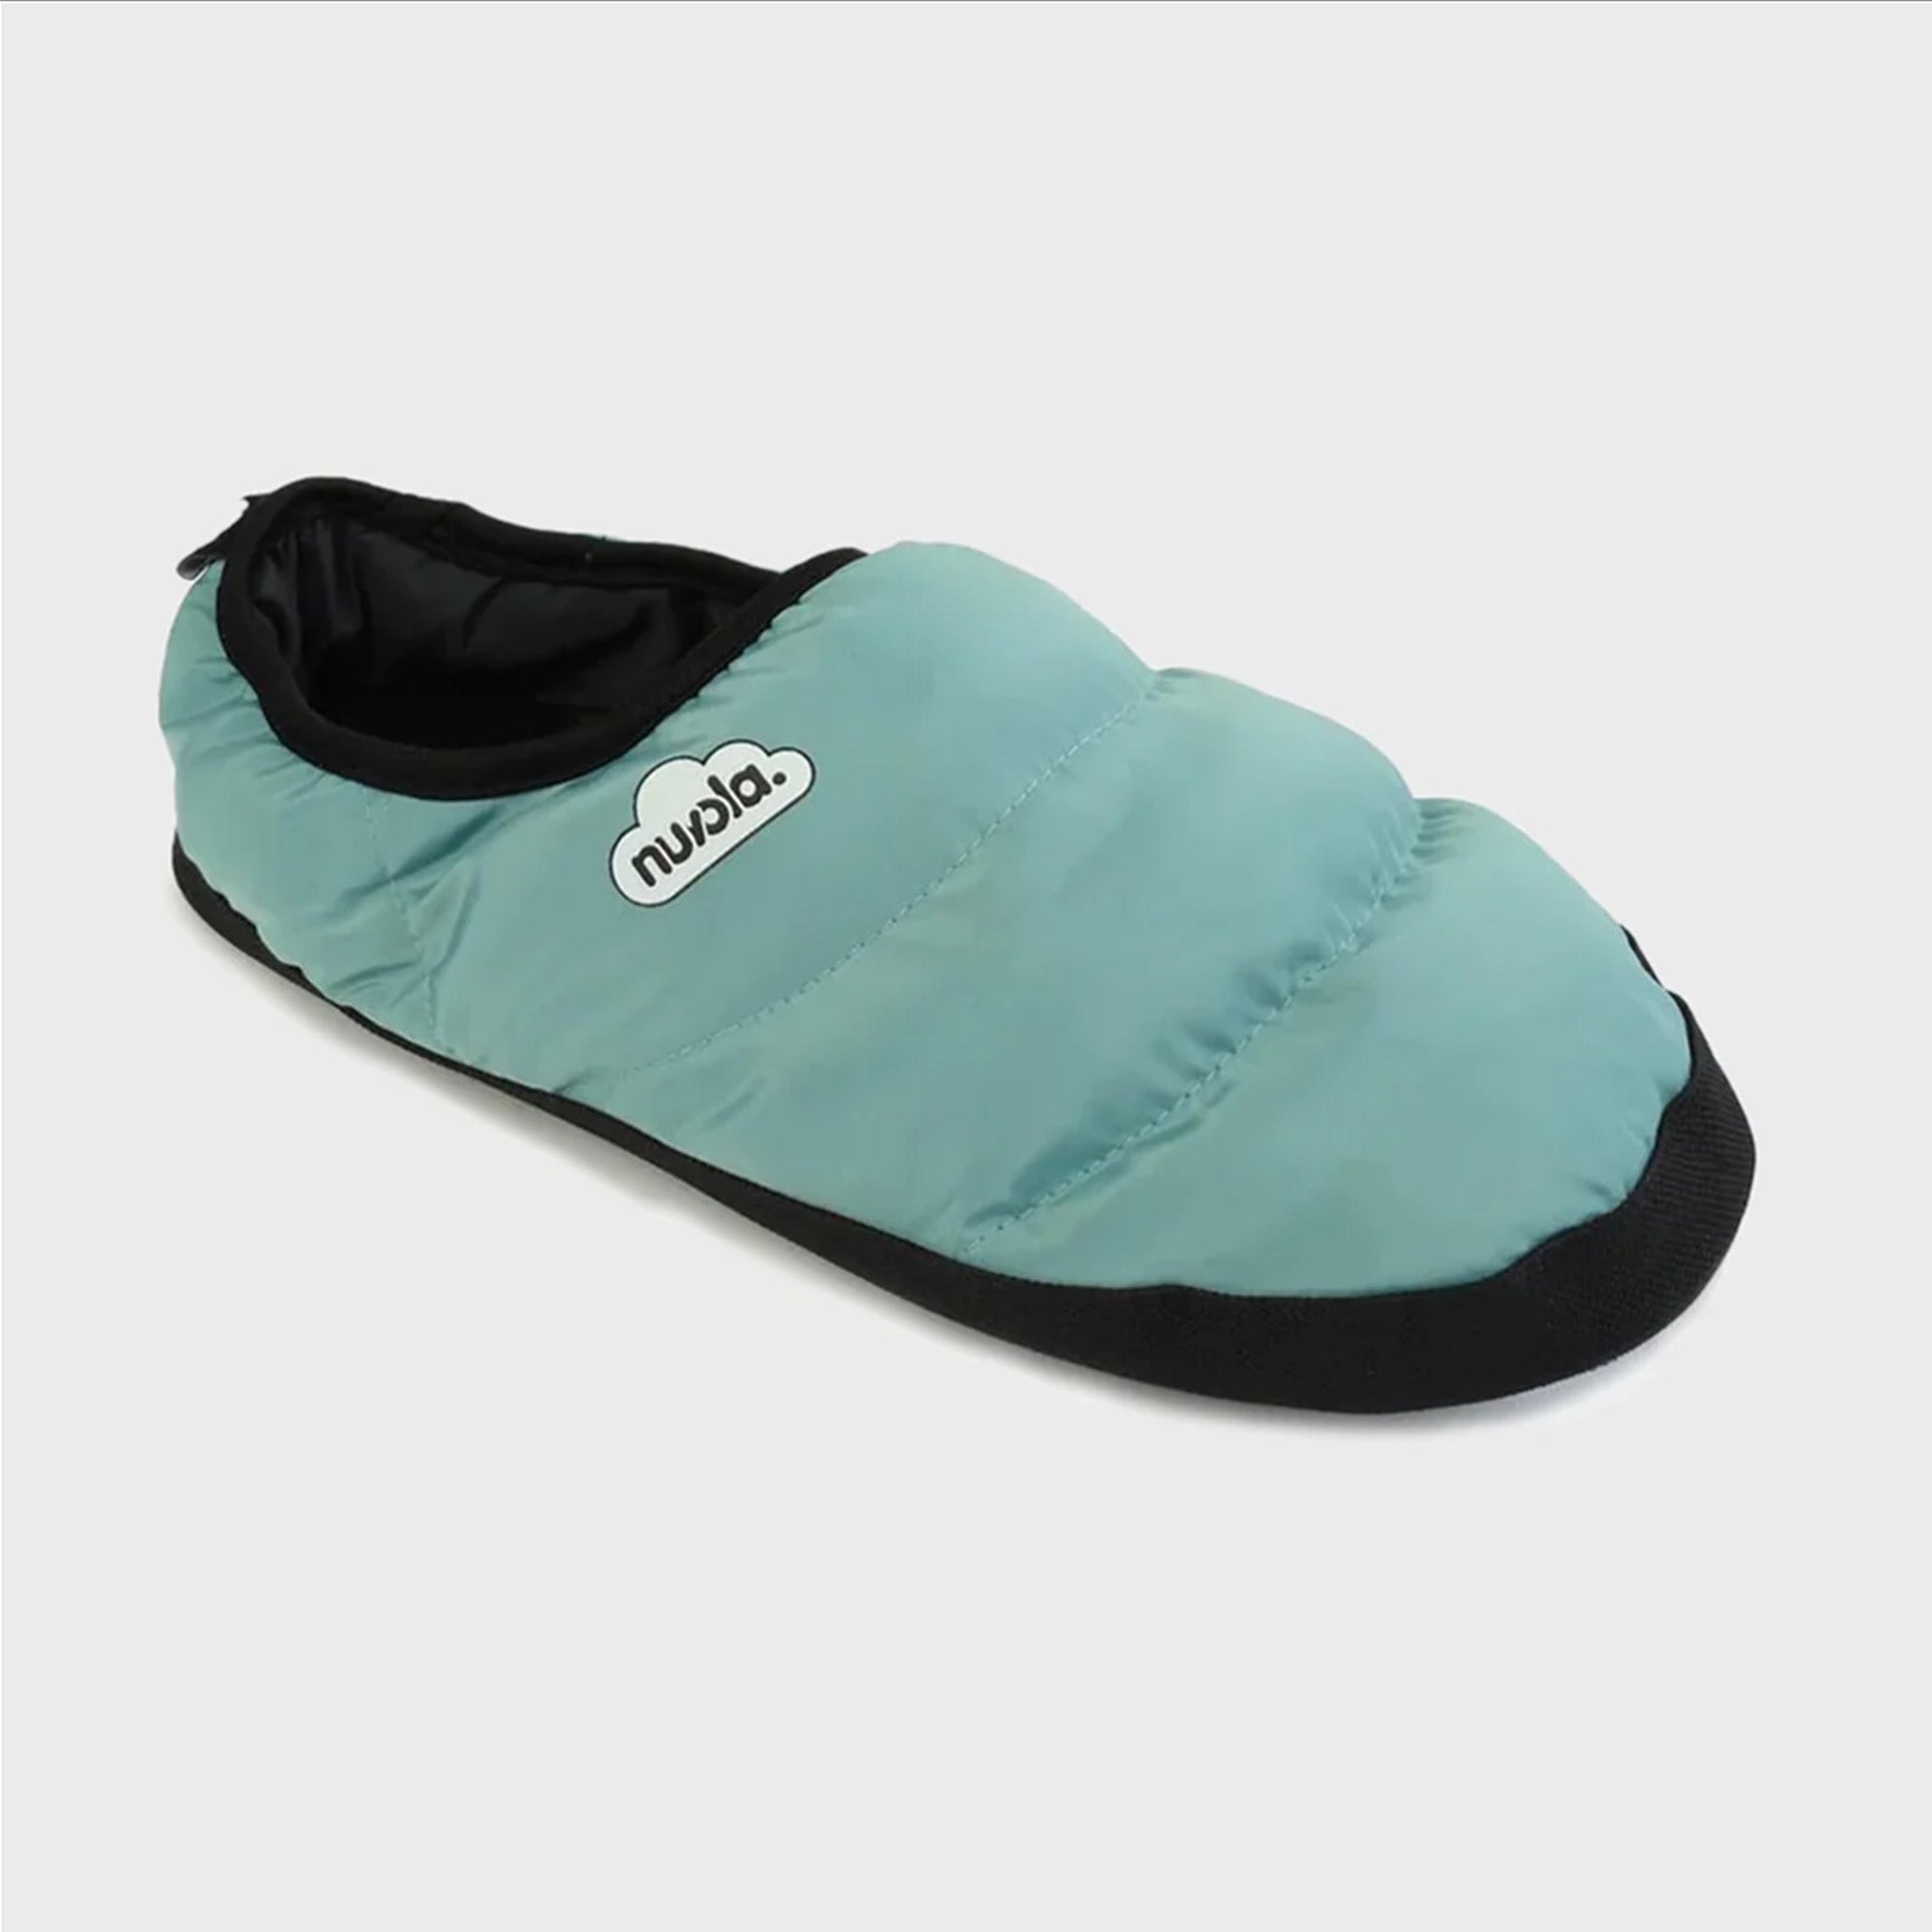 Nuvola Classic Slippers in Water Green CNCLAG46 FROM EIGHTYWINGOLD - OFFICIAL BRAND PARTNER